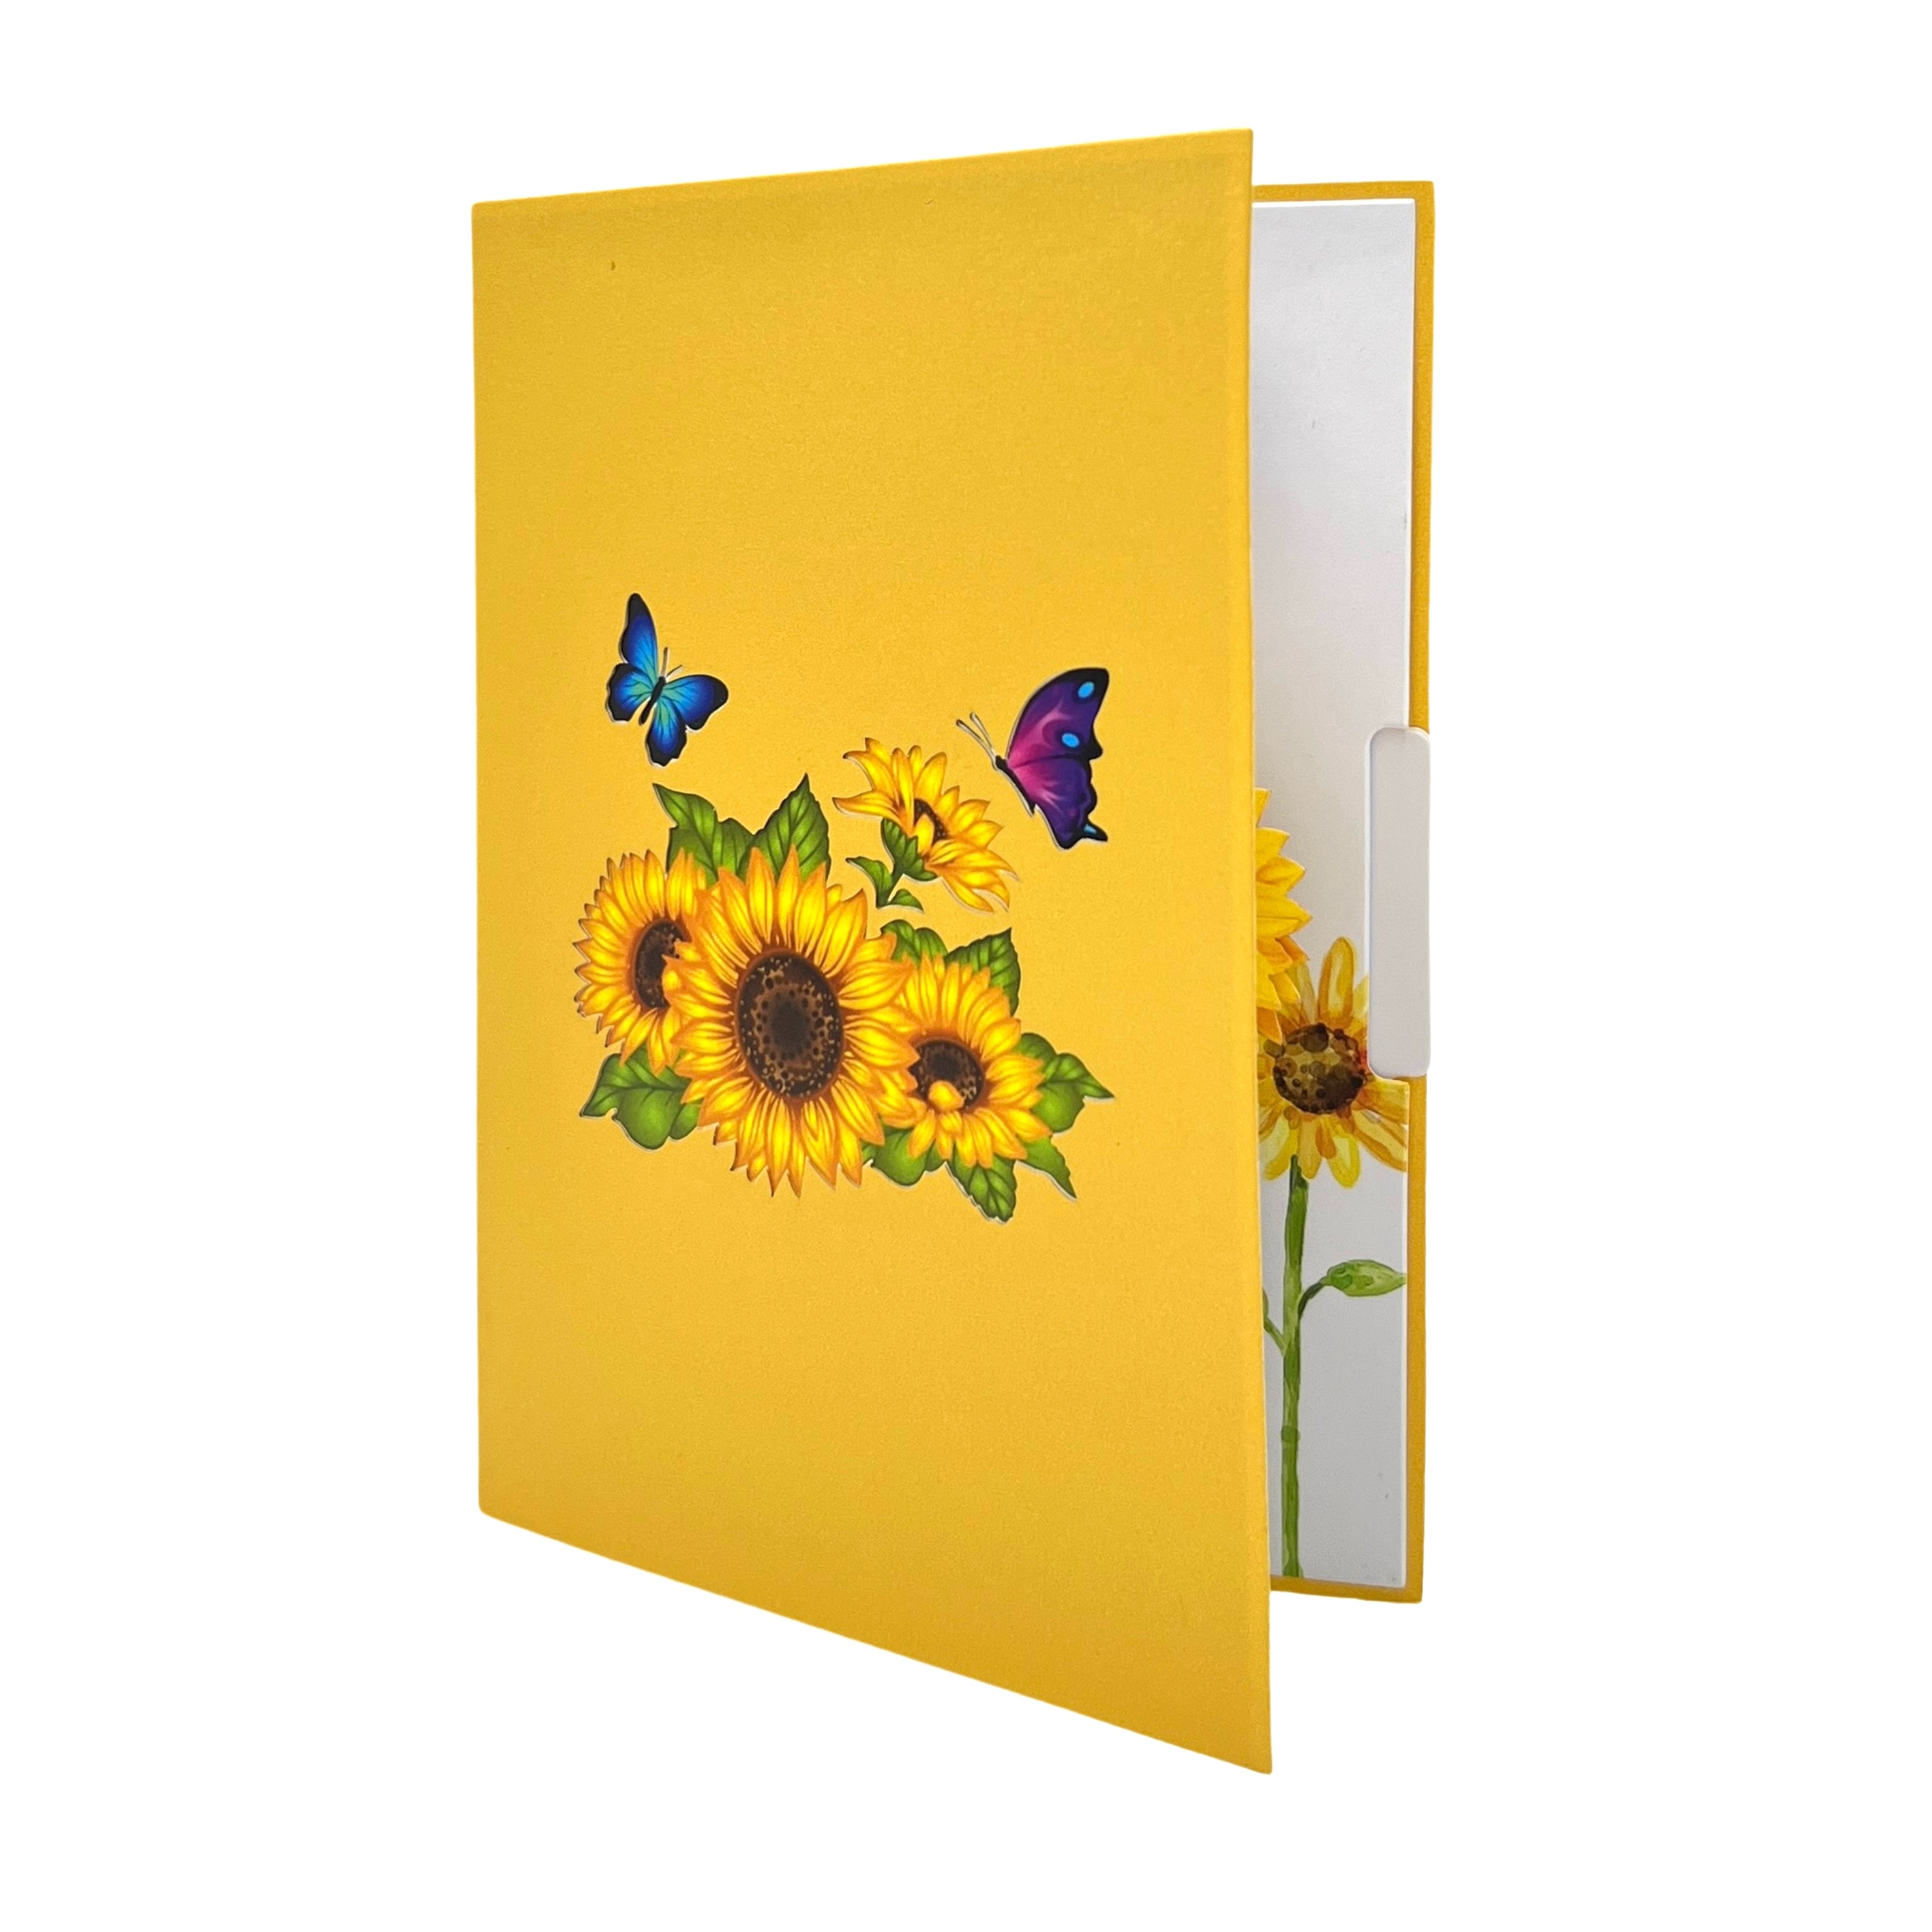 Pop Up Greeting Card Blooming Sun Flower Card Flower Field Bloom Card Nature Lover Gift Thank you Birthday for Mom Dad Gift Friend Family